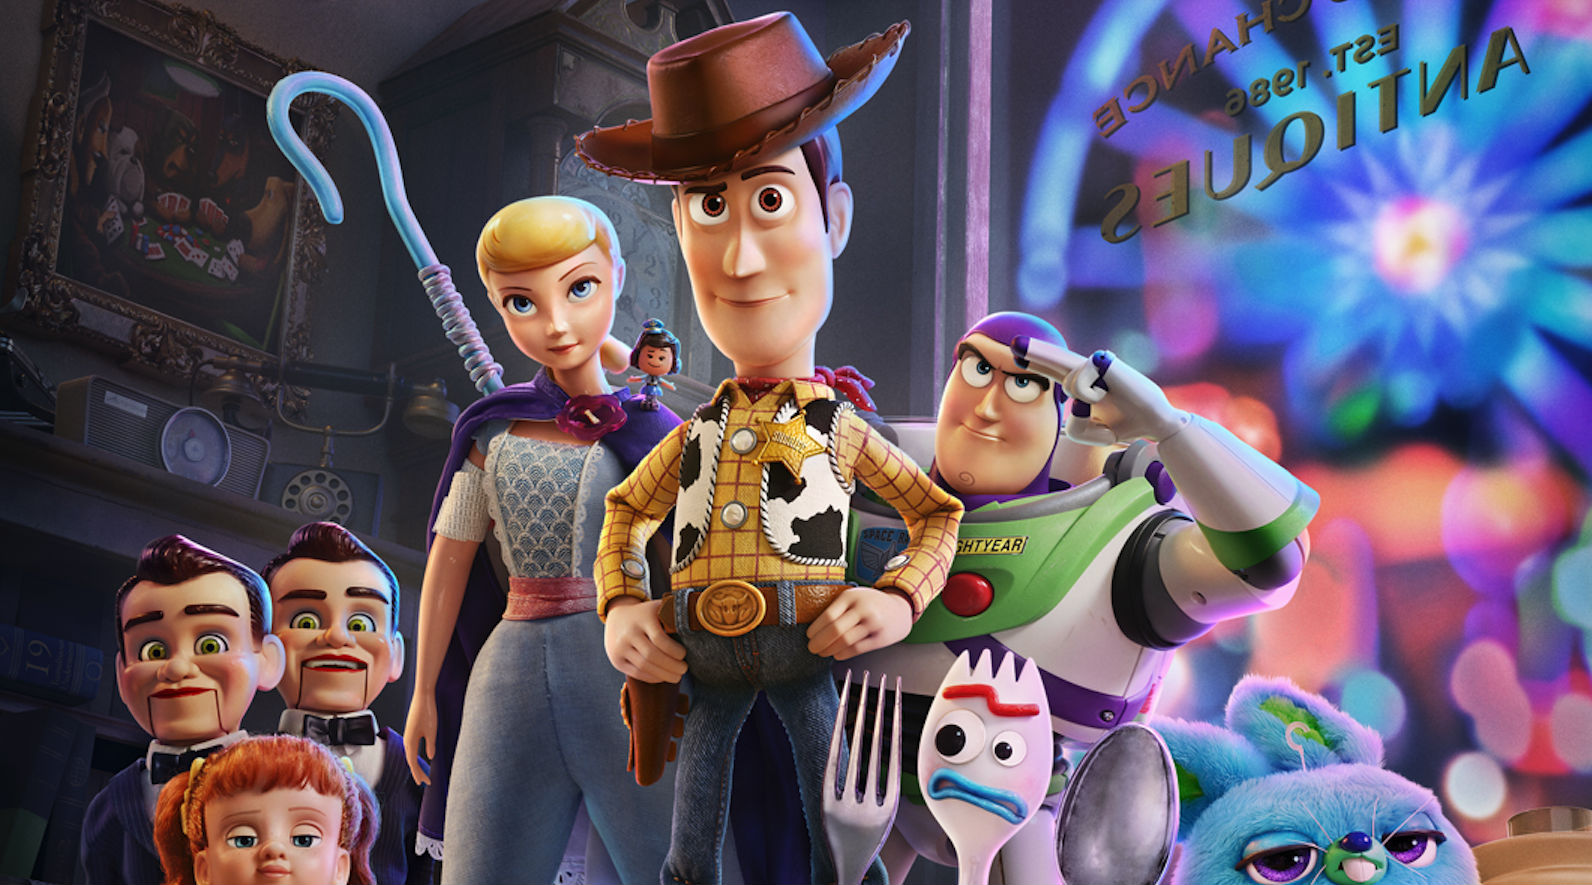 Pixar To Focus On Original Content After Toy Story 4